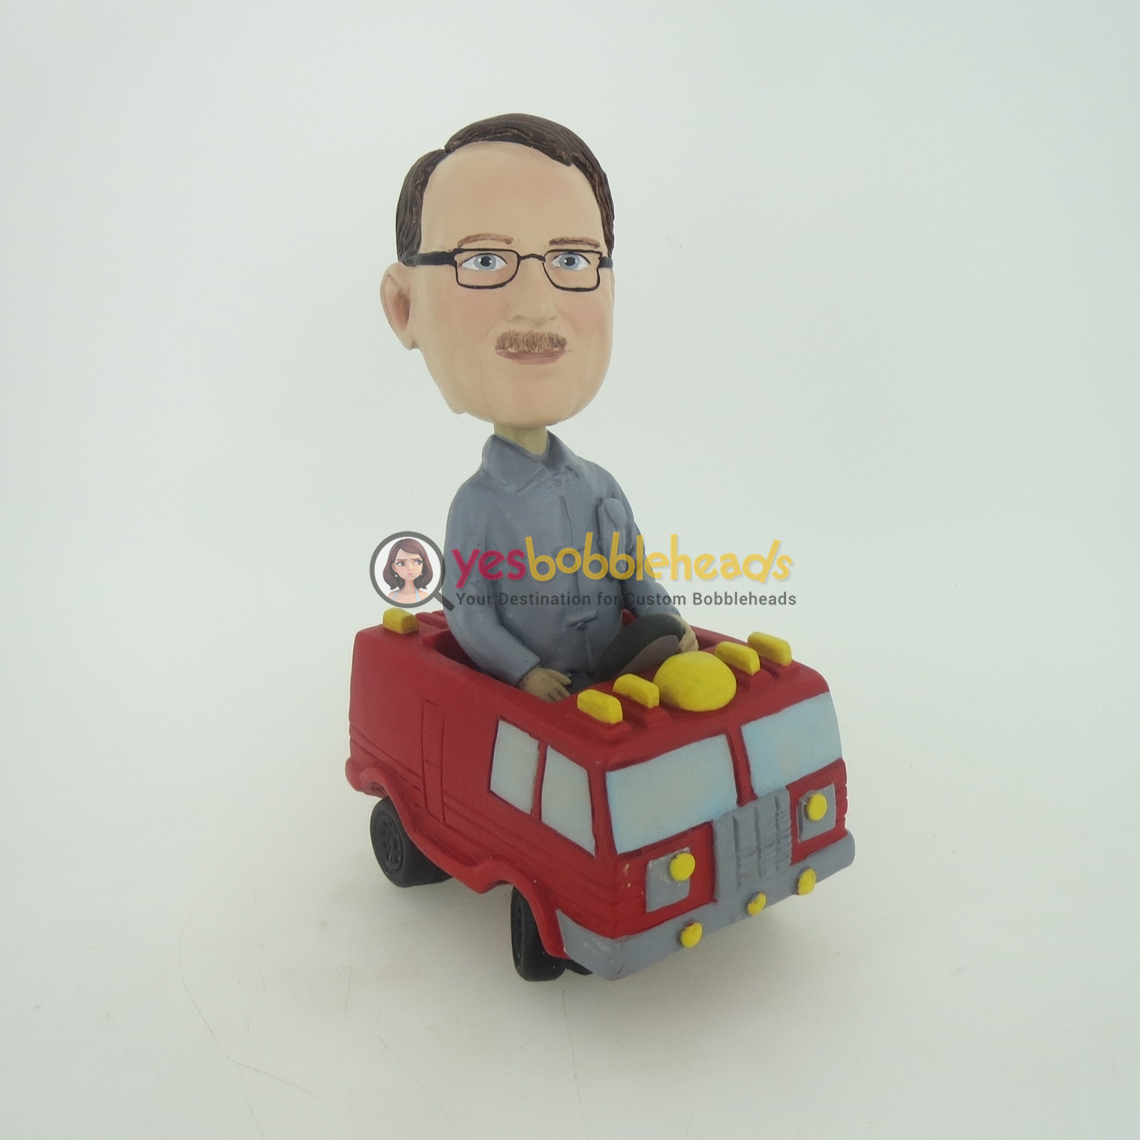 Picture of Custom Bobblehead Doll: Man In Fire Engine